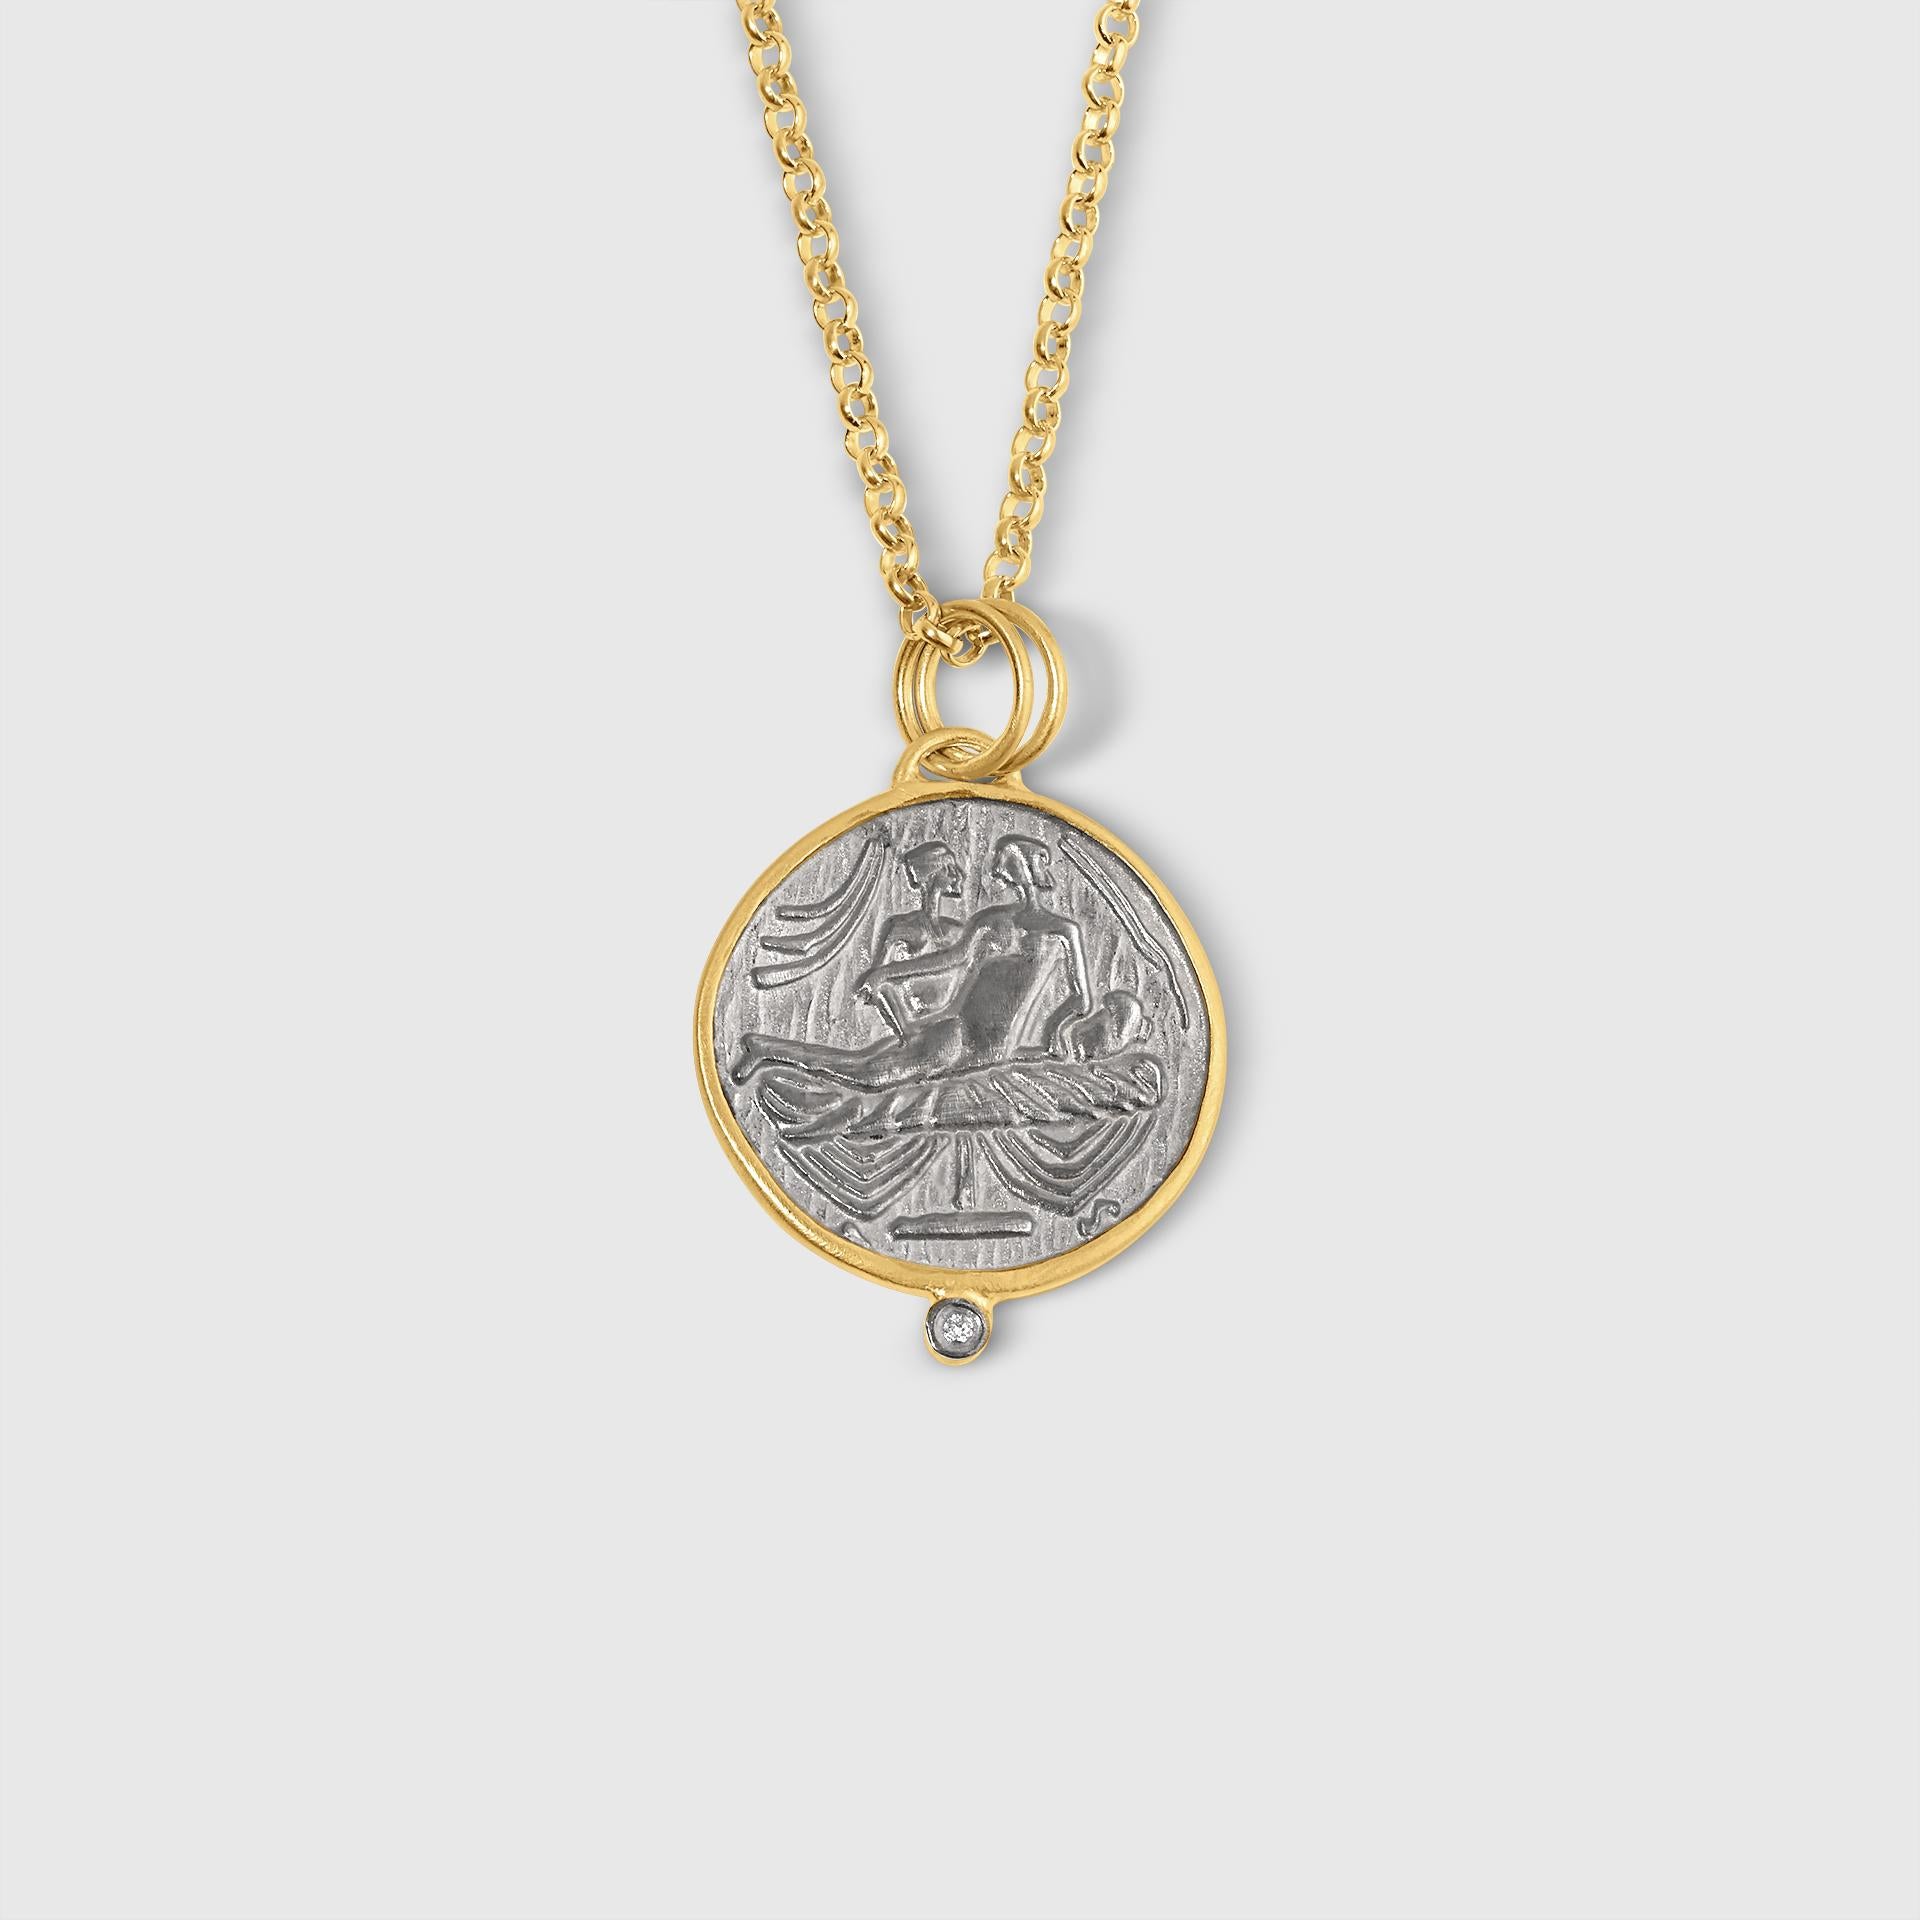 Pompei III Coin Replica w/ Diamond Detail, 24kt Yellow Gold and Silver by Kurtulan, Size Large, Diamonds: 0.02ct, Colour: H Clarity: VS2, Comes with 18